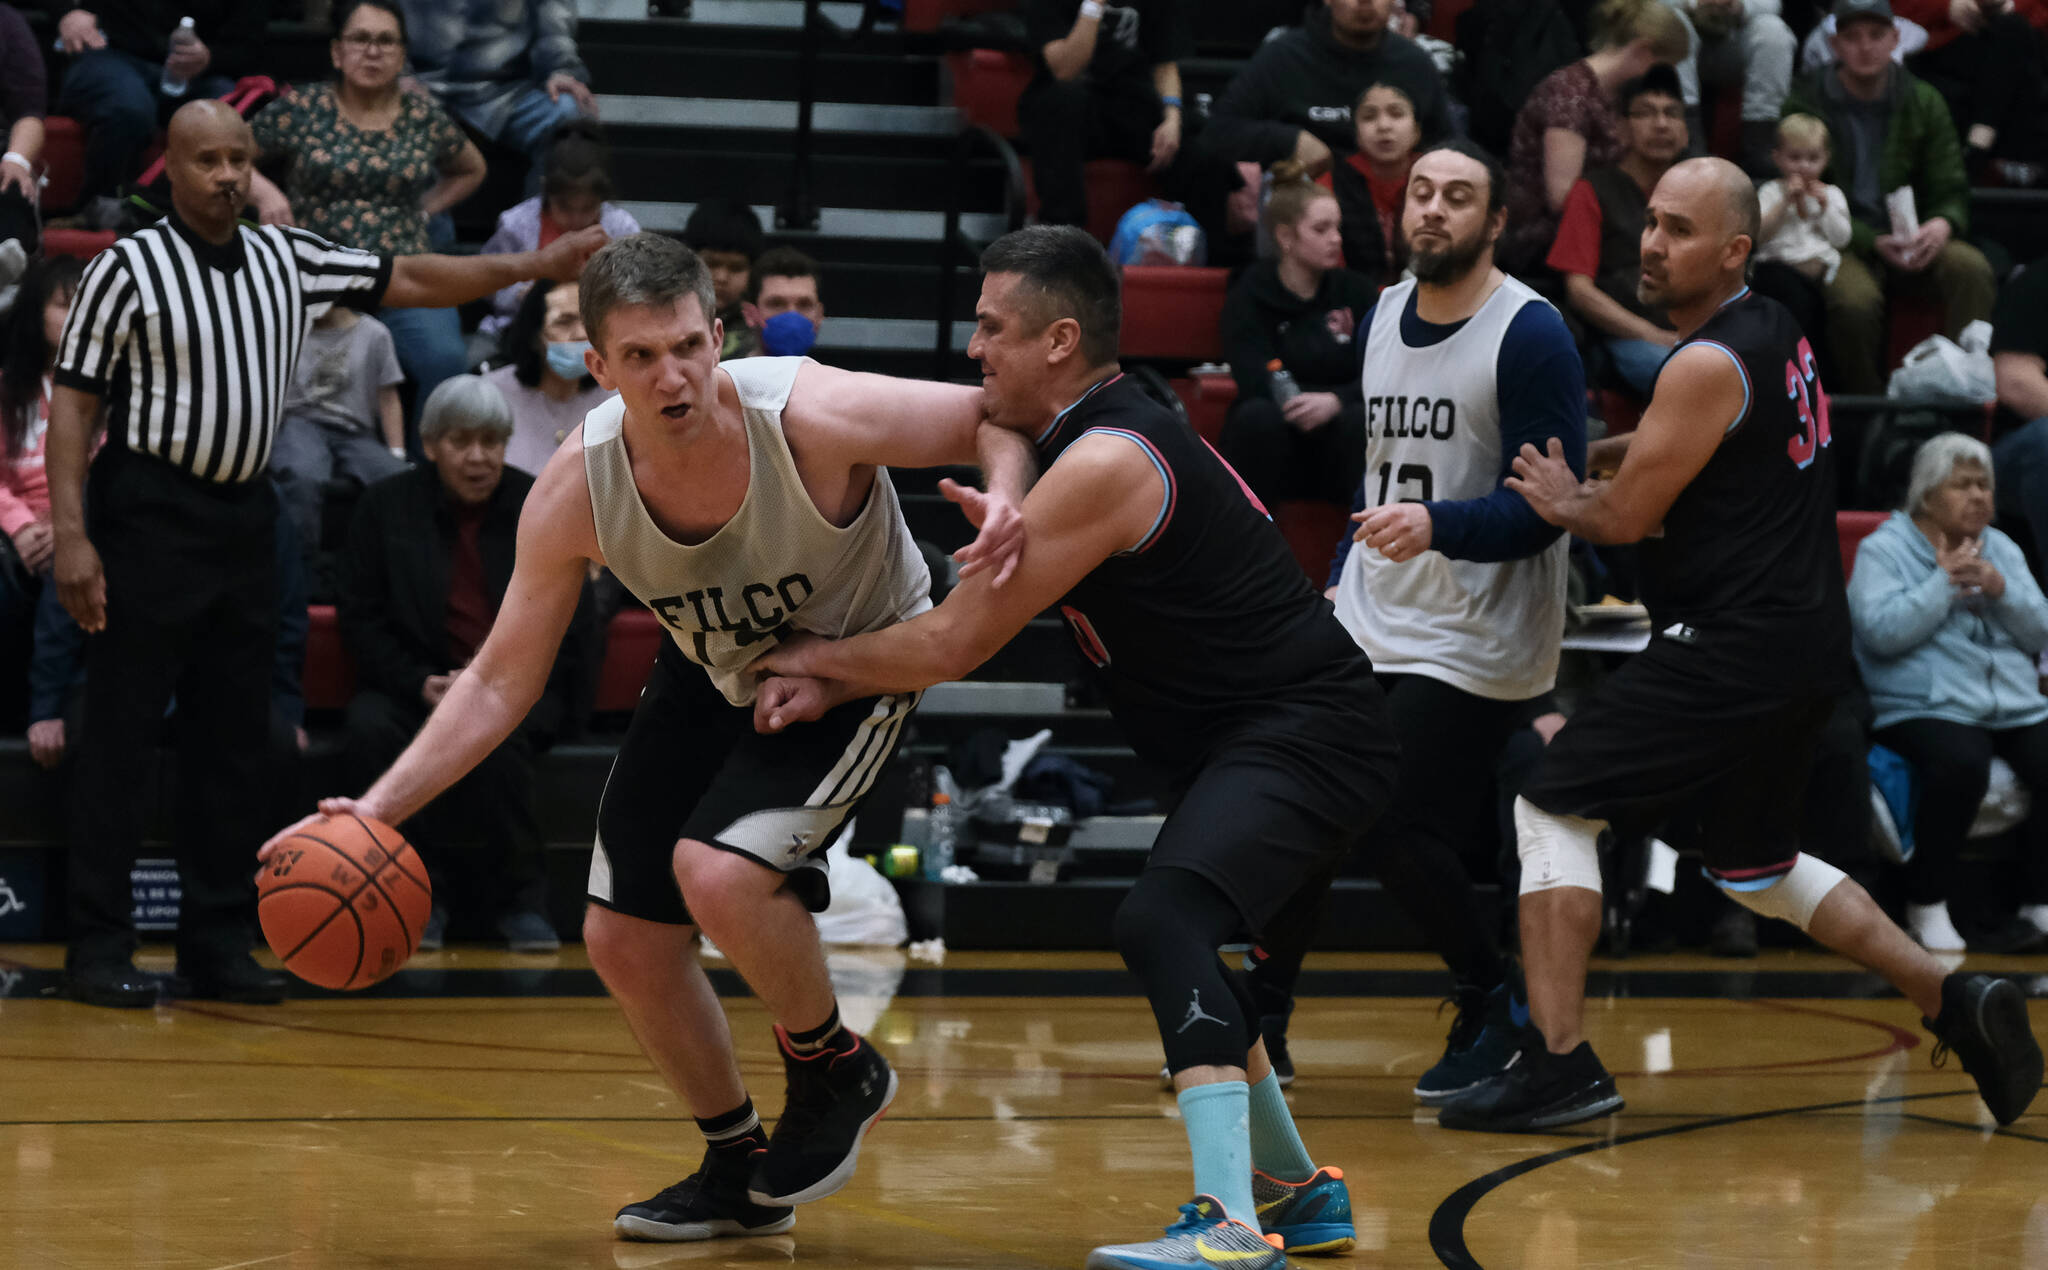 Filcom’s Tom Gisler dribbles under pressure from Hoonah’s Anthony Lindoff during C Bracket action in the Gold Medal Basketball Tournament, Monday, March 20, at Juneau-Douglas High School: Yadaa.at Kalé. (Klas Stolpe/For the Juneau Empire)